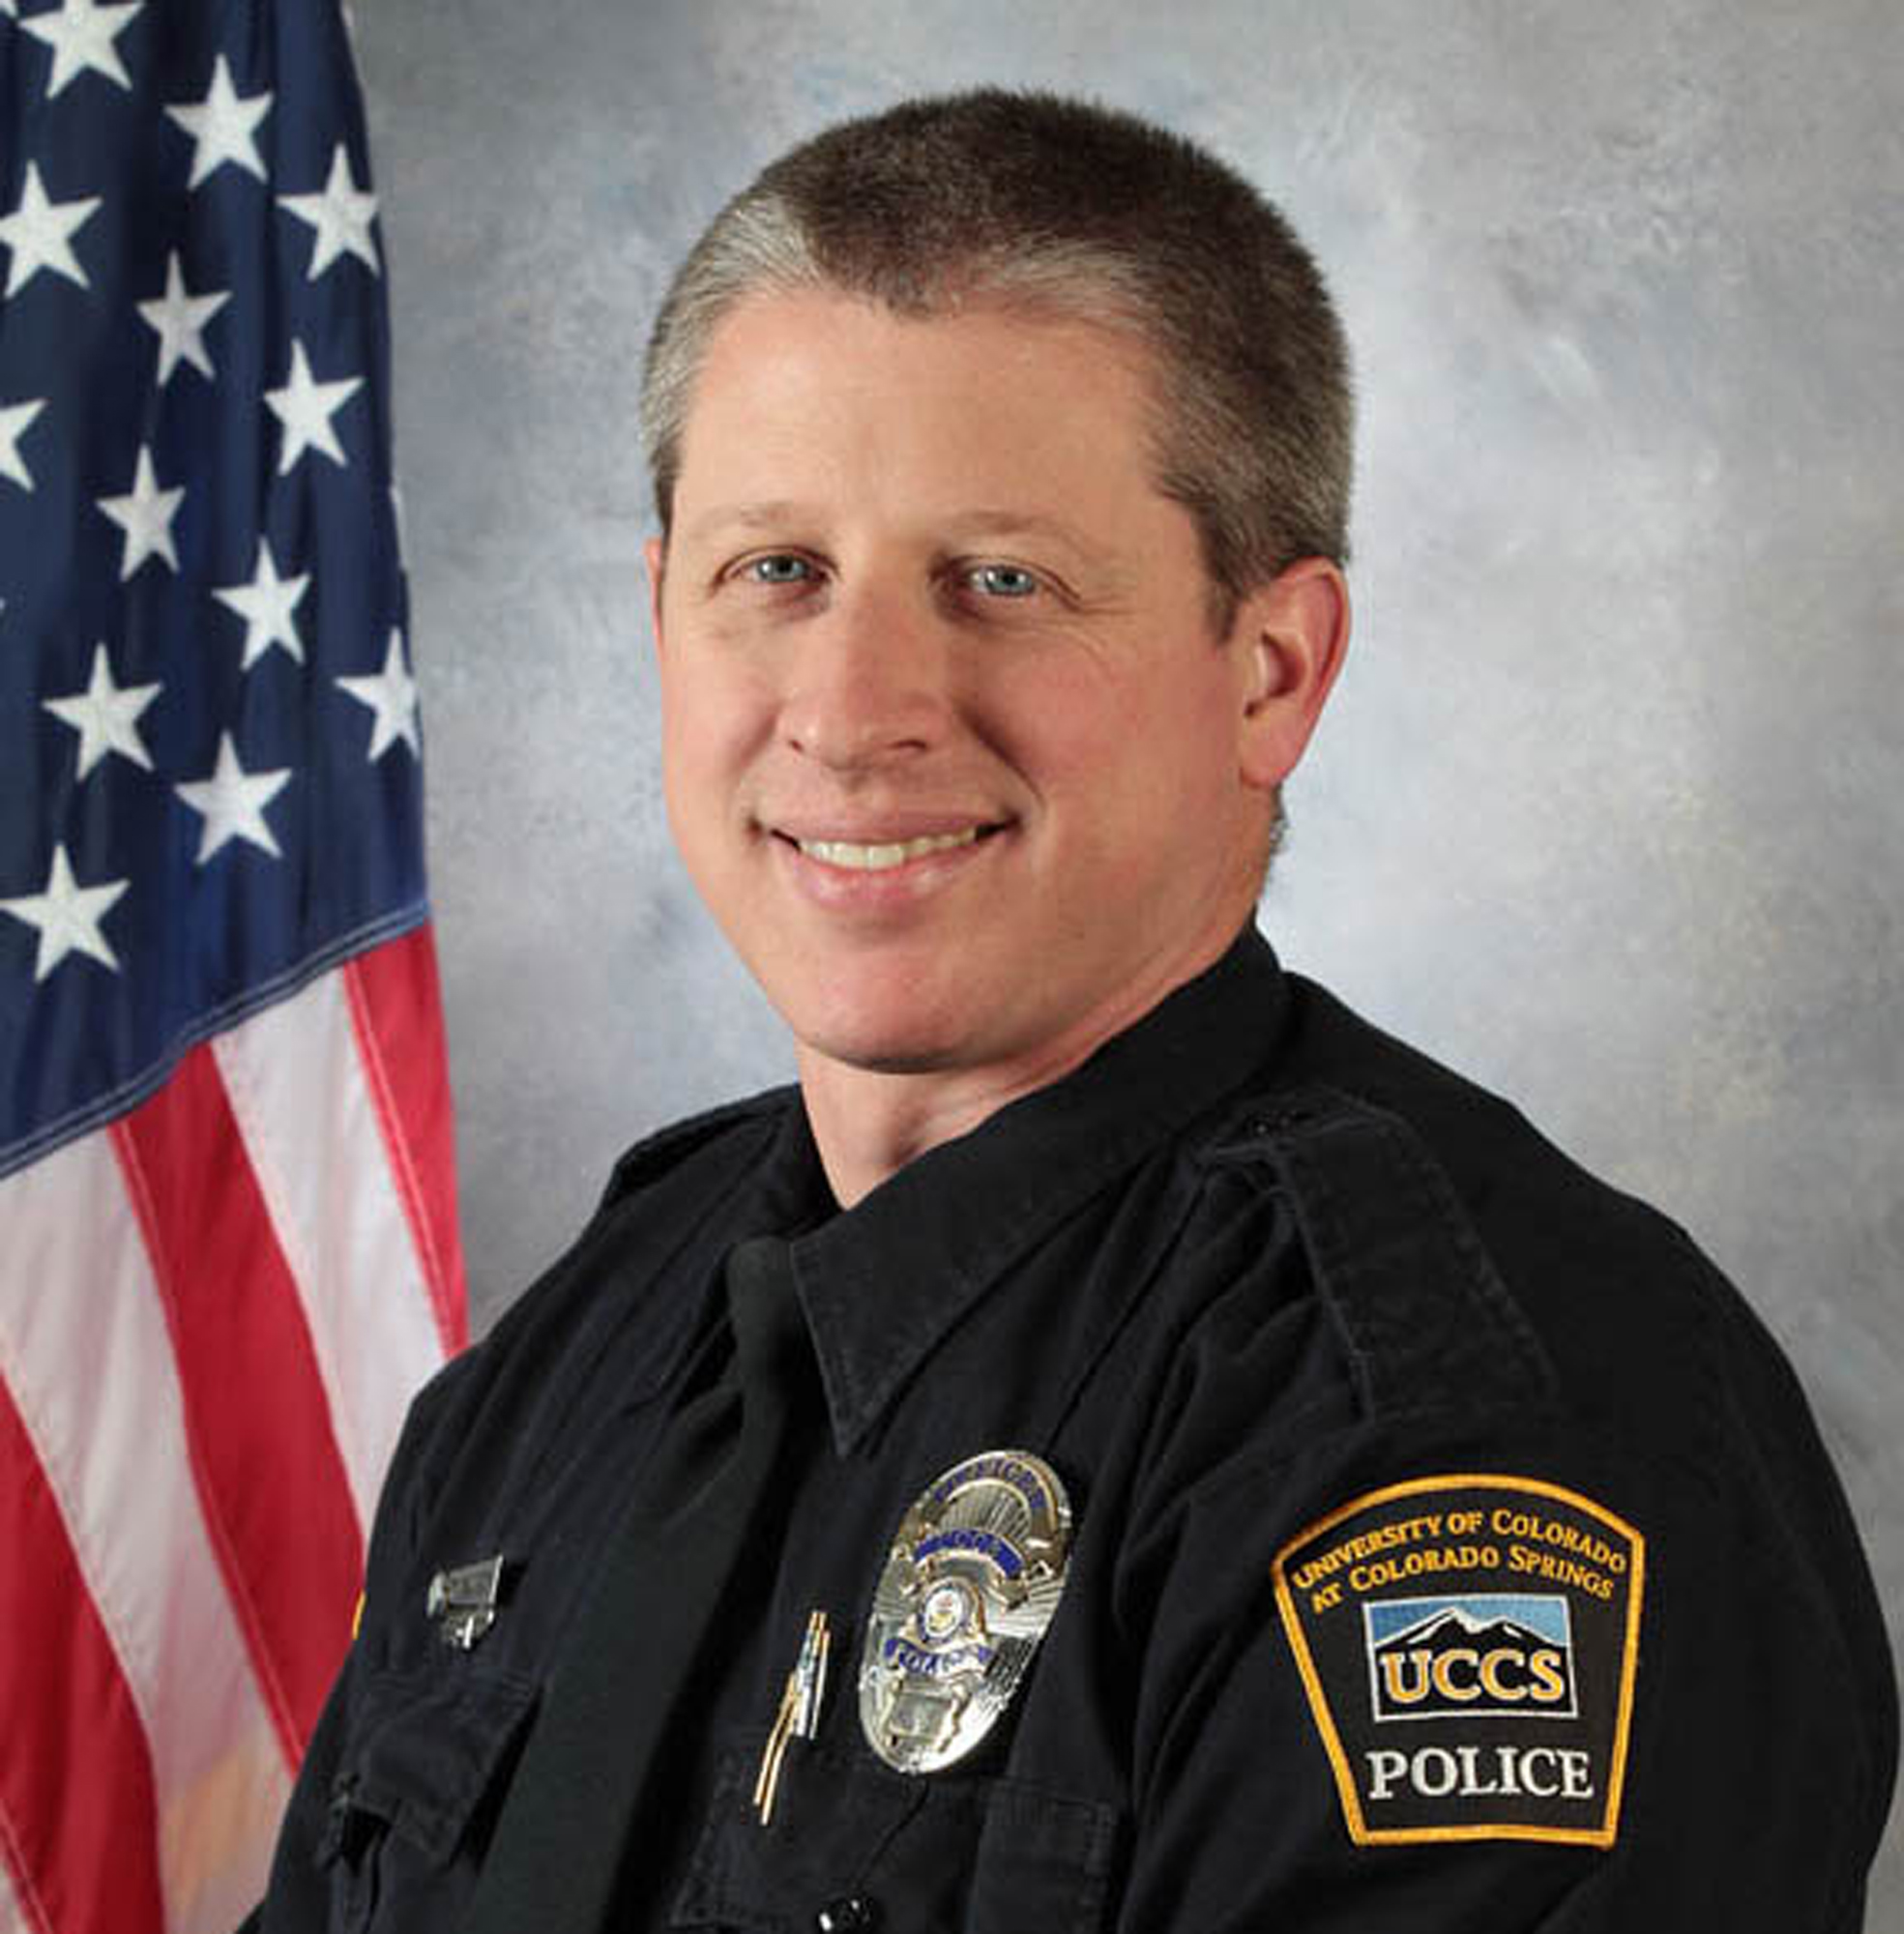 PHOTO: This photo provided by the University of Colorado at Colorado Springs shows officer Garrett Swasey, who was killed in a shooting at a Planned Parenthood clinic in Colorado Springs, Colo., Friday, Nov. 27, 2015.